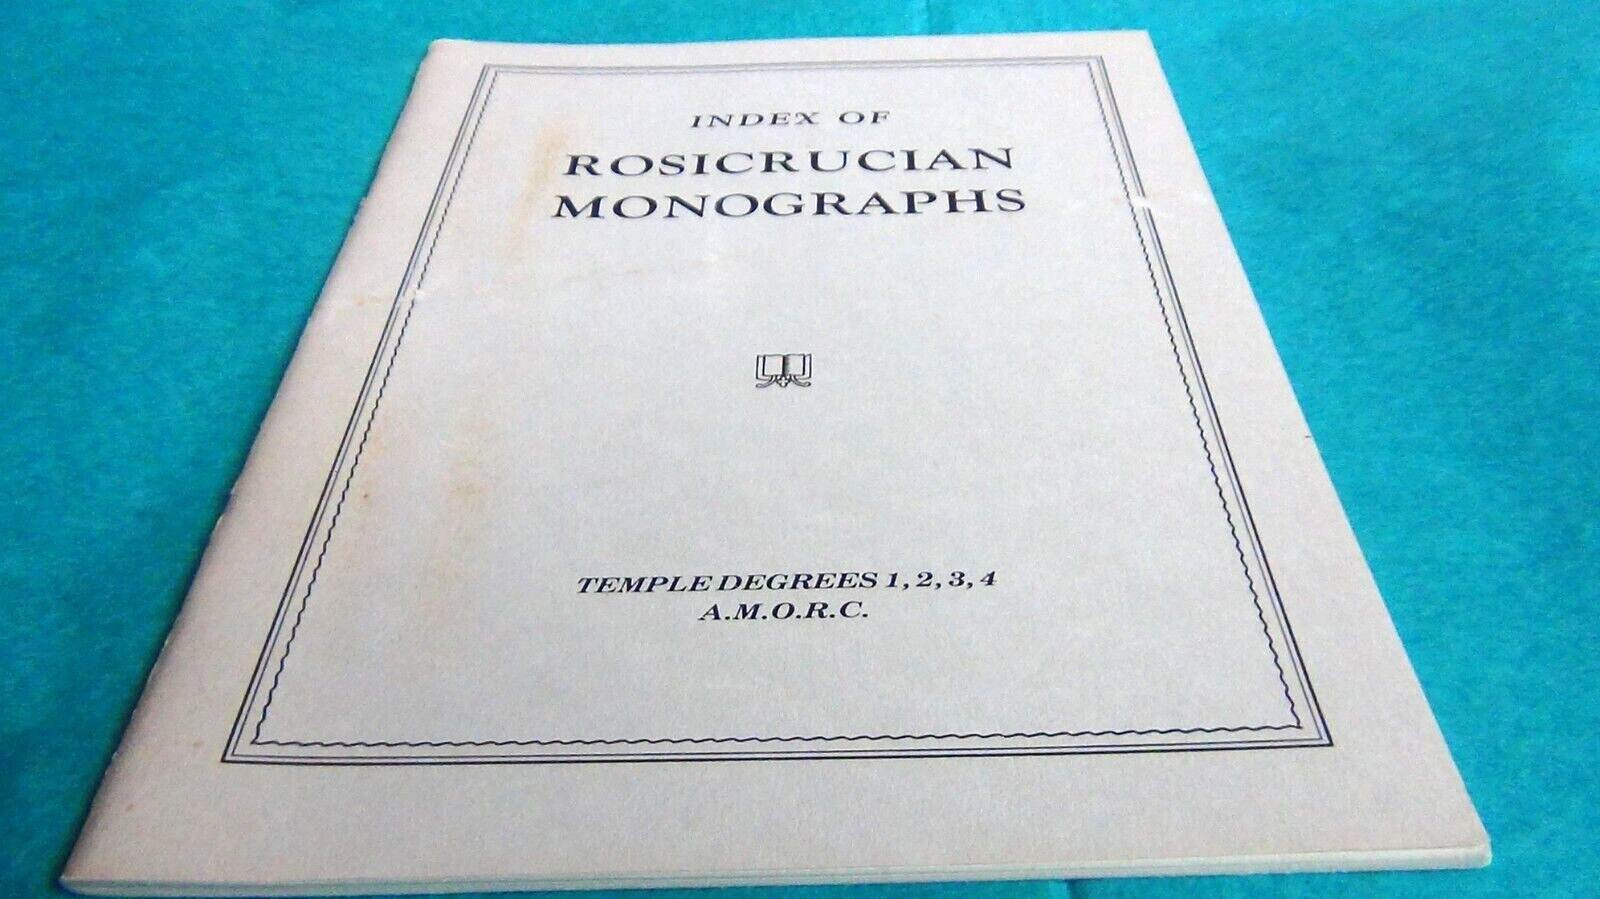 Index Of Rosicrucian Monographs Degrees 1, 2, 3, 4 A.M.O.R.C. 